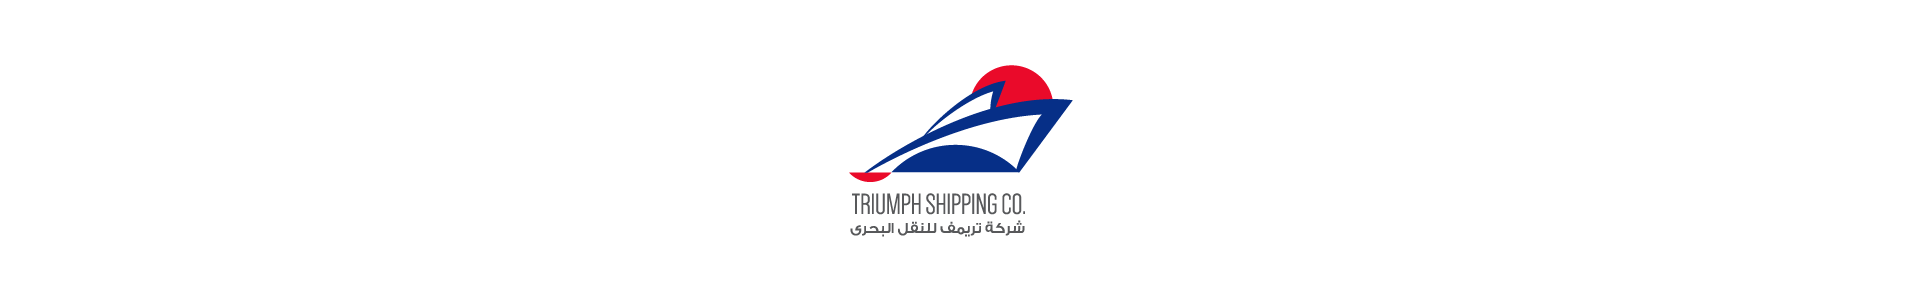 artlink advertising Giveaways Triumph Shipping